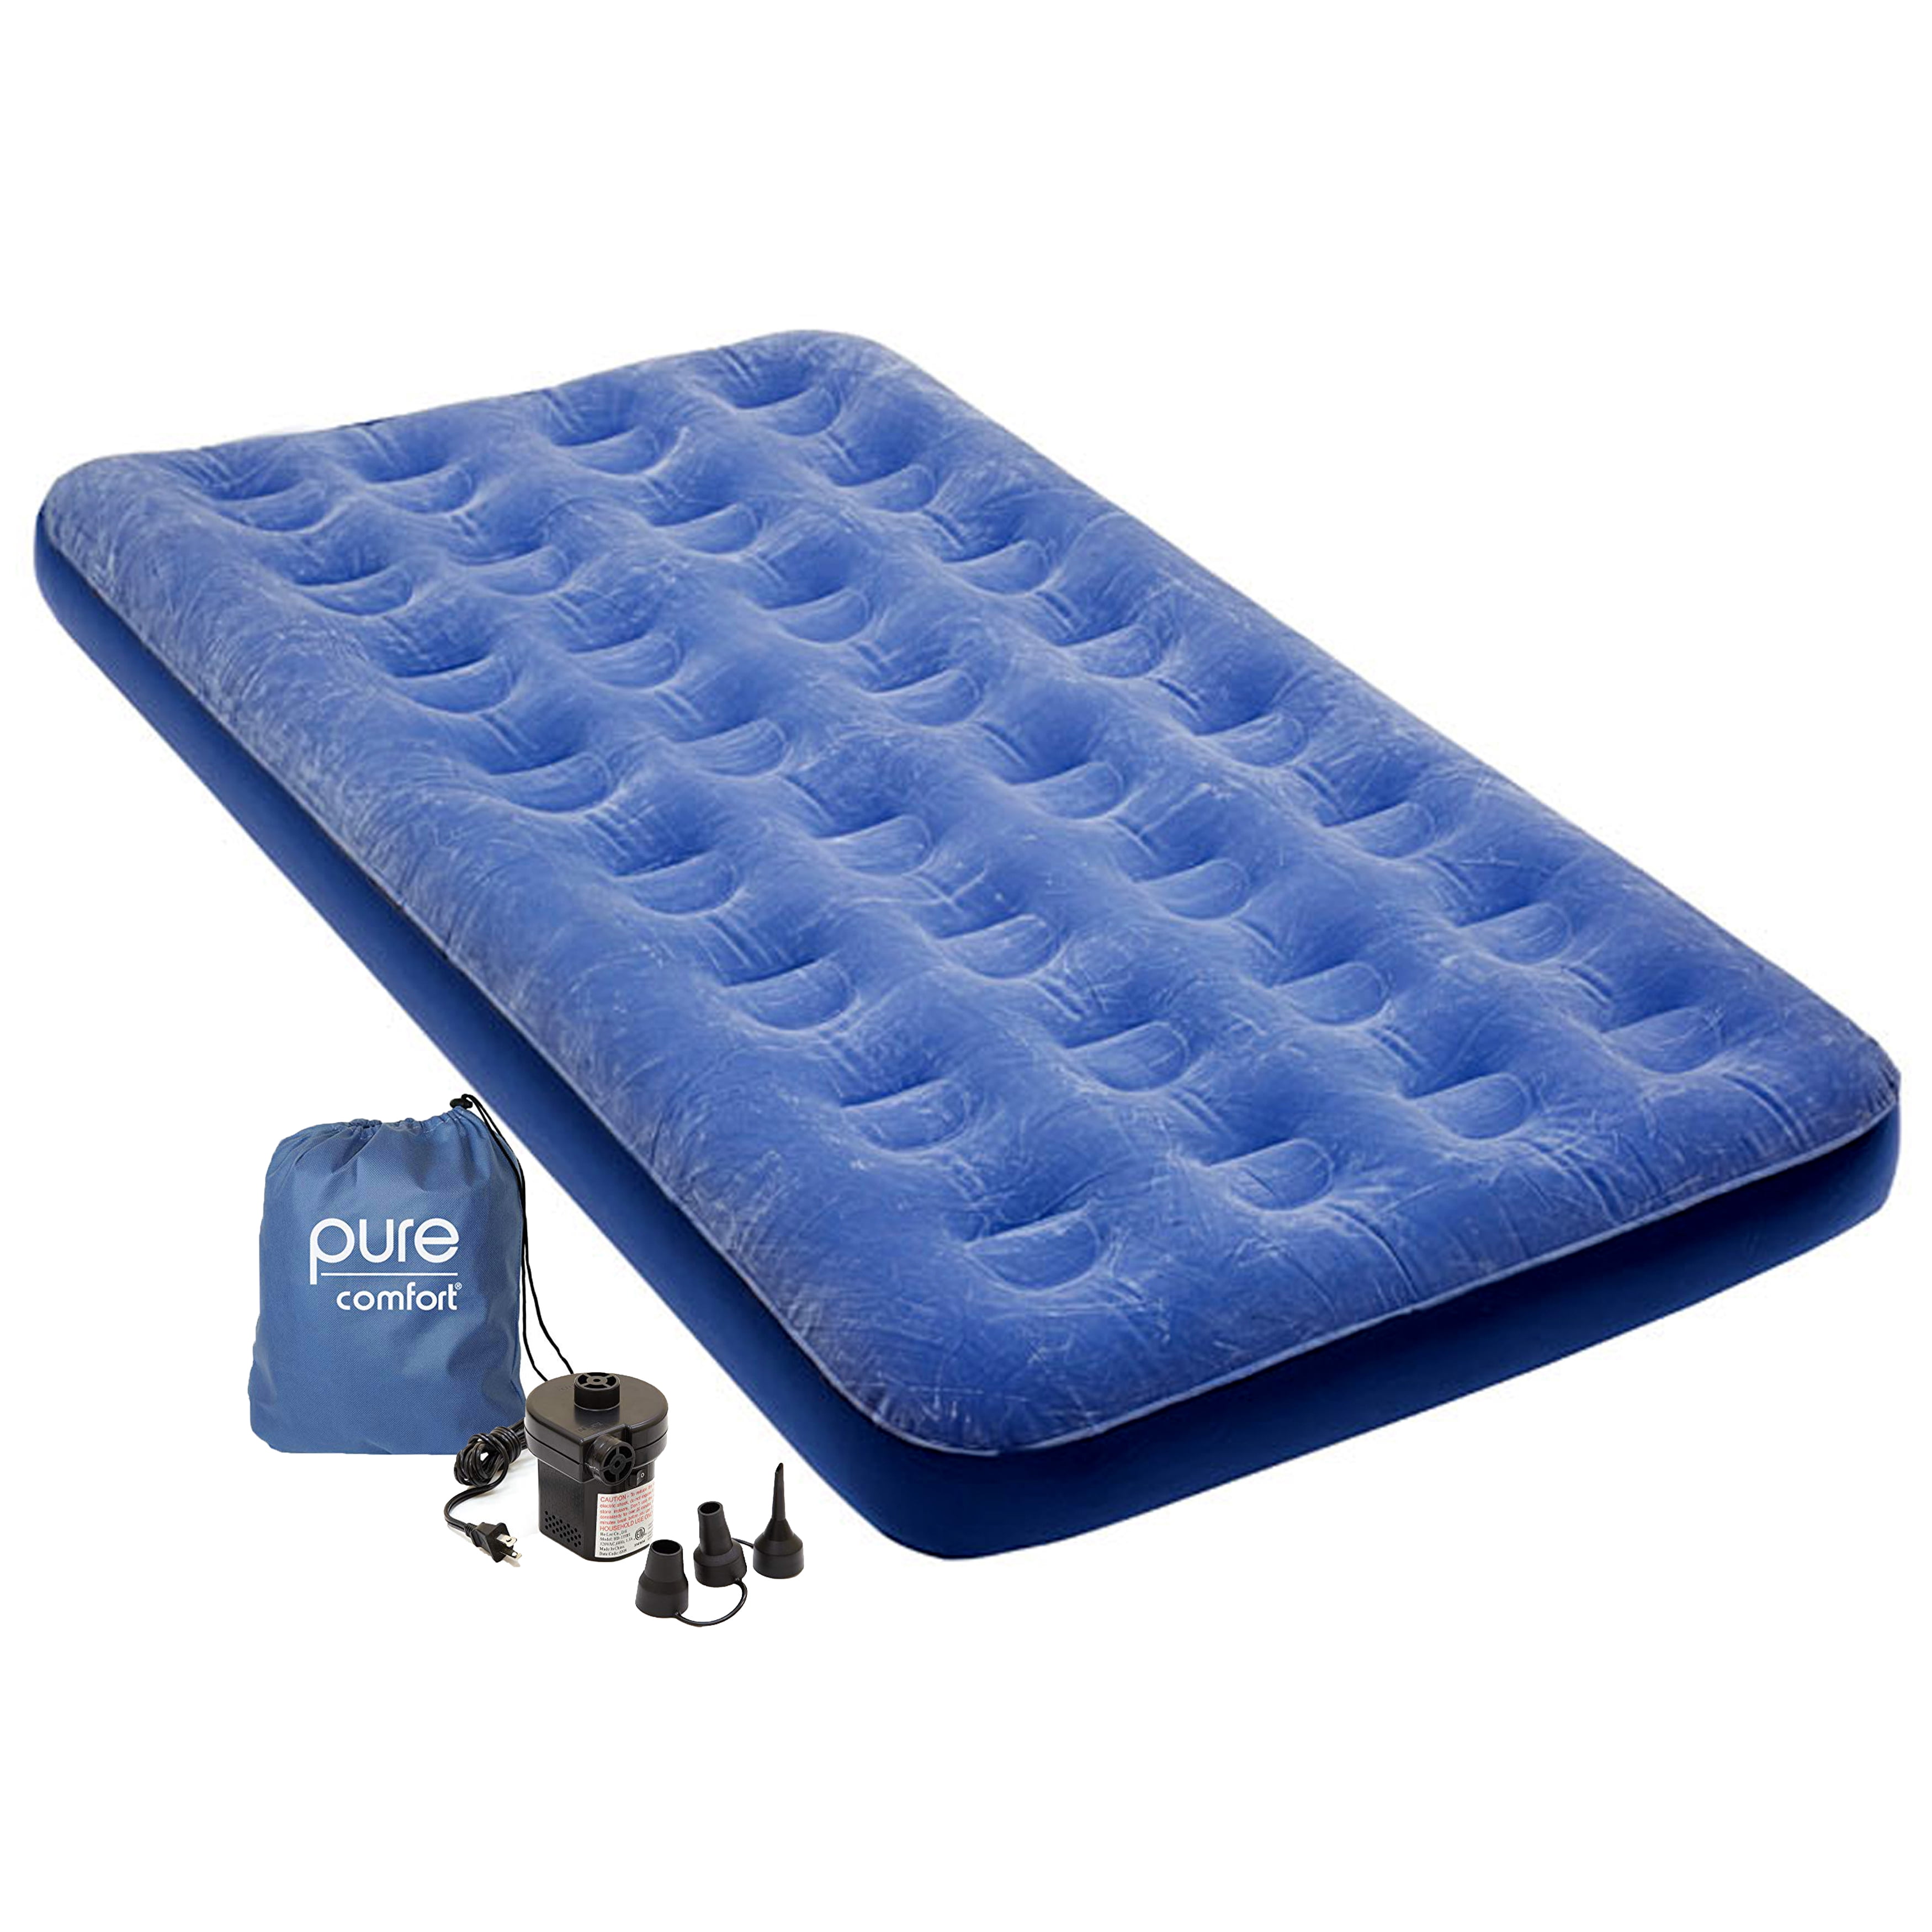 Details about   Air Mattress Twin Size Raised Durable Ultra Soft Waterproof Flocked Dura Grip 